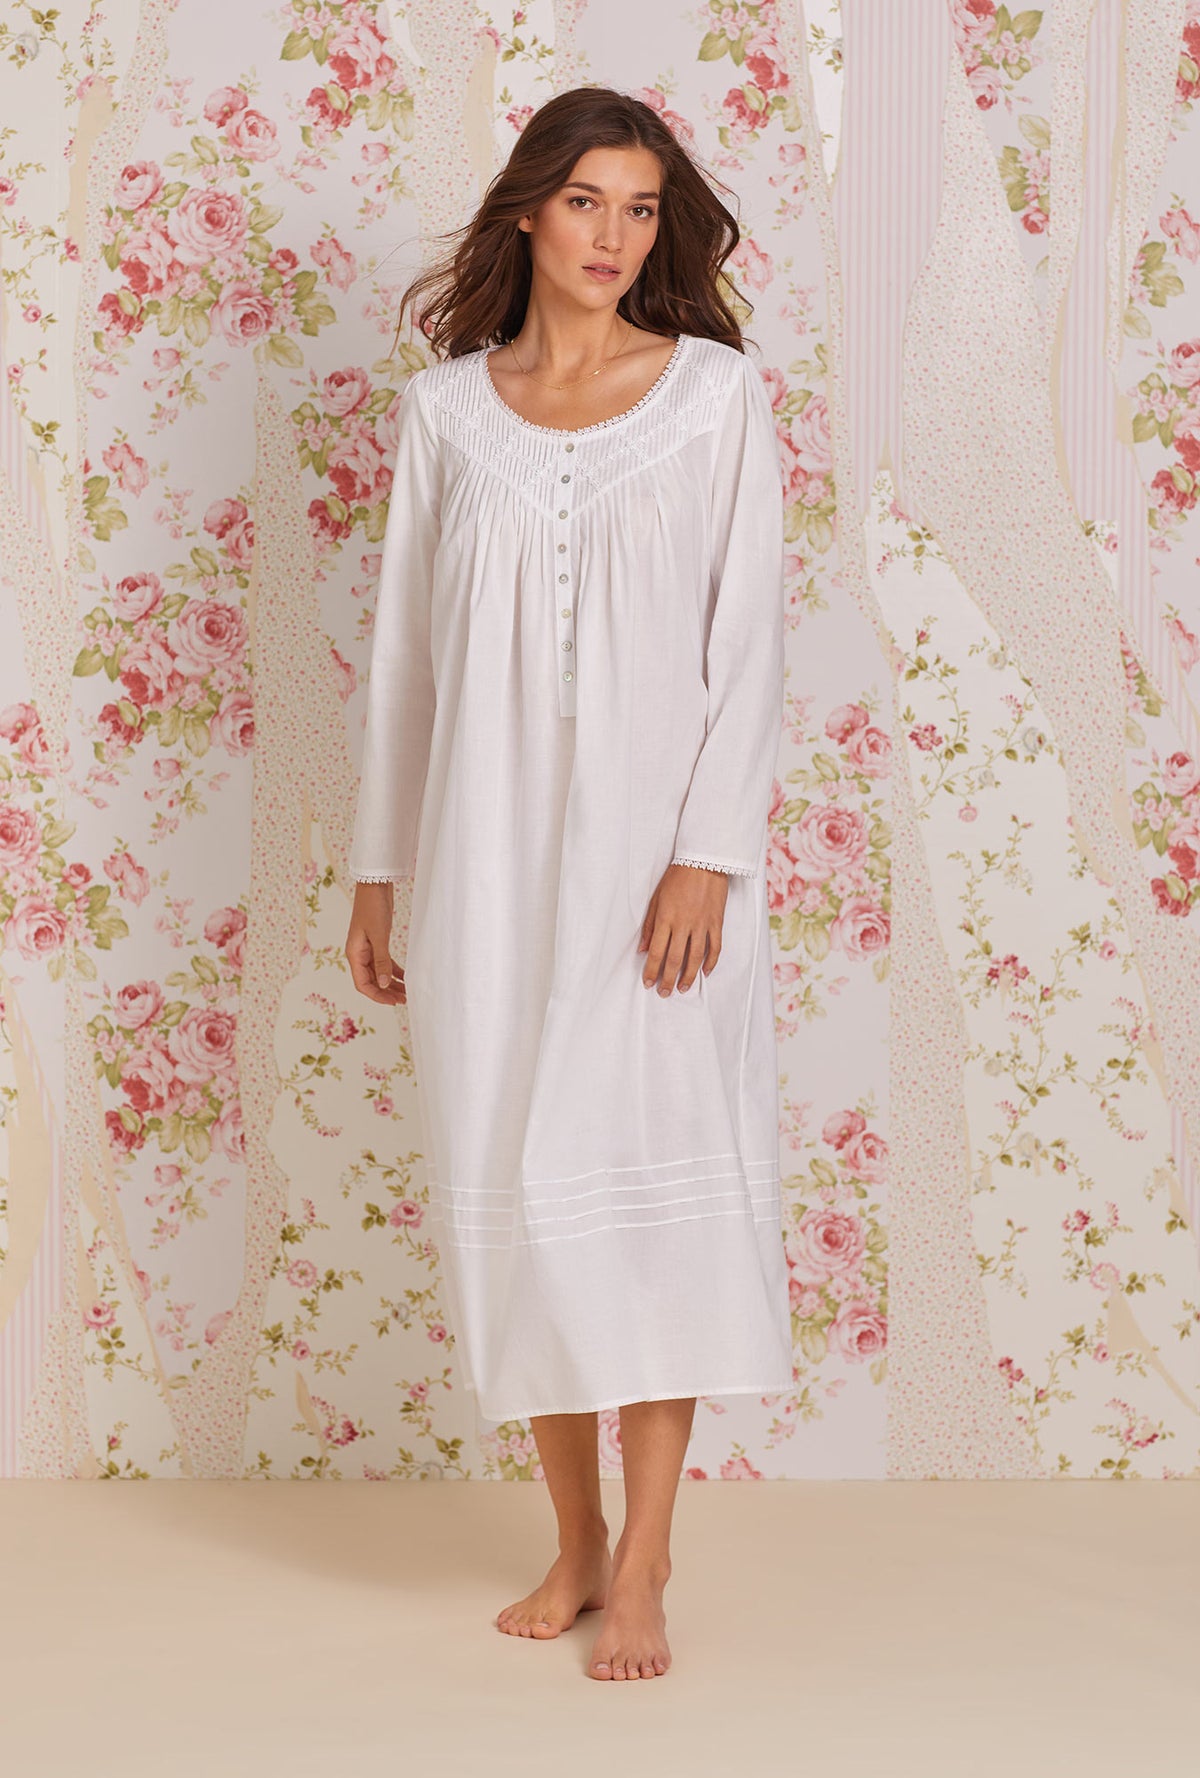 Poetic Long Sleeve Nightgown - White - Eileen West